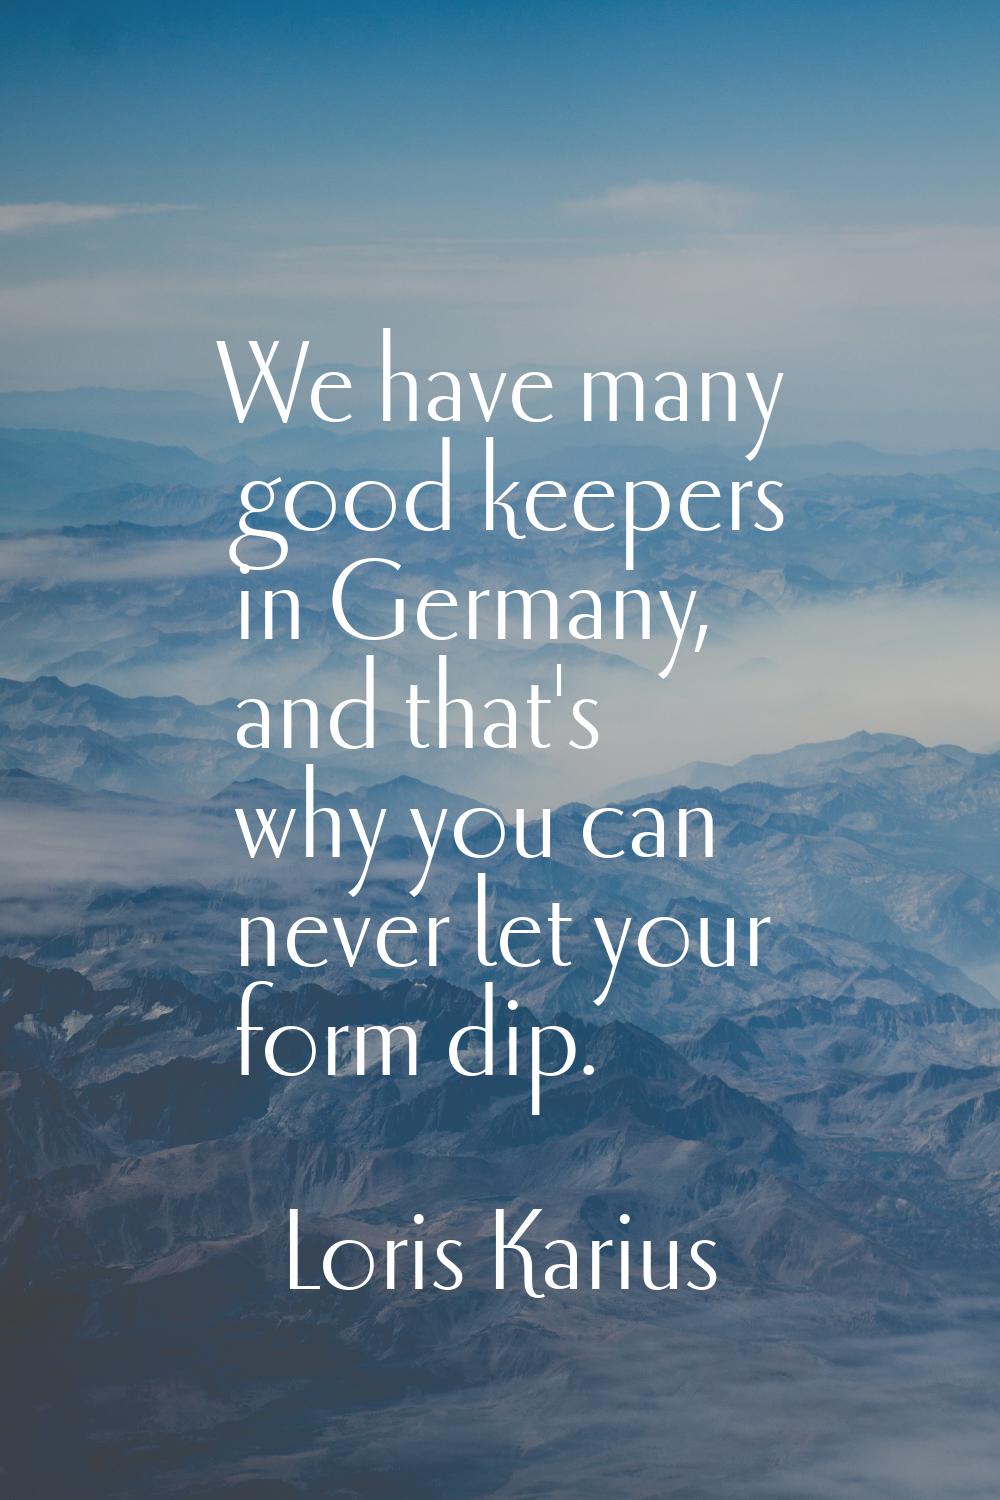 We have many good keepers in Germany, and that's why you can never let your form dip.